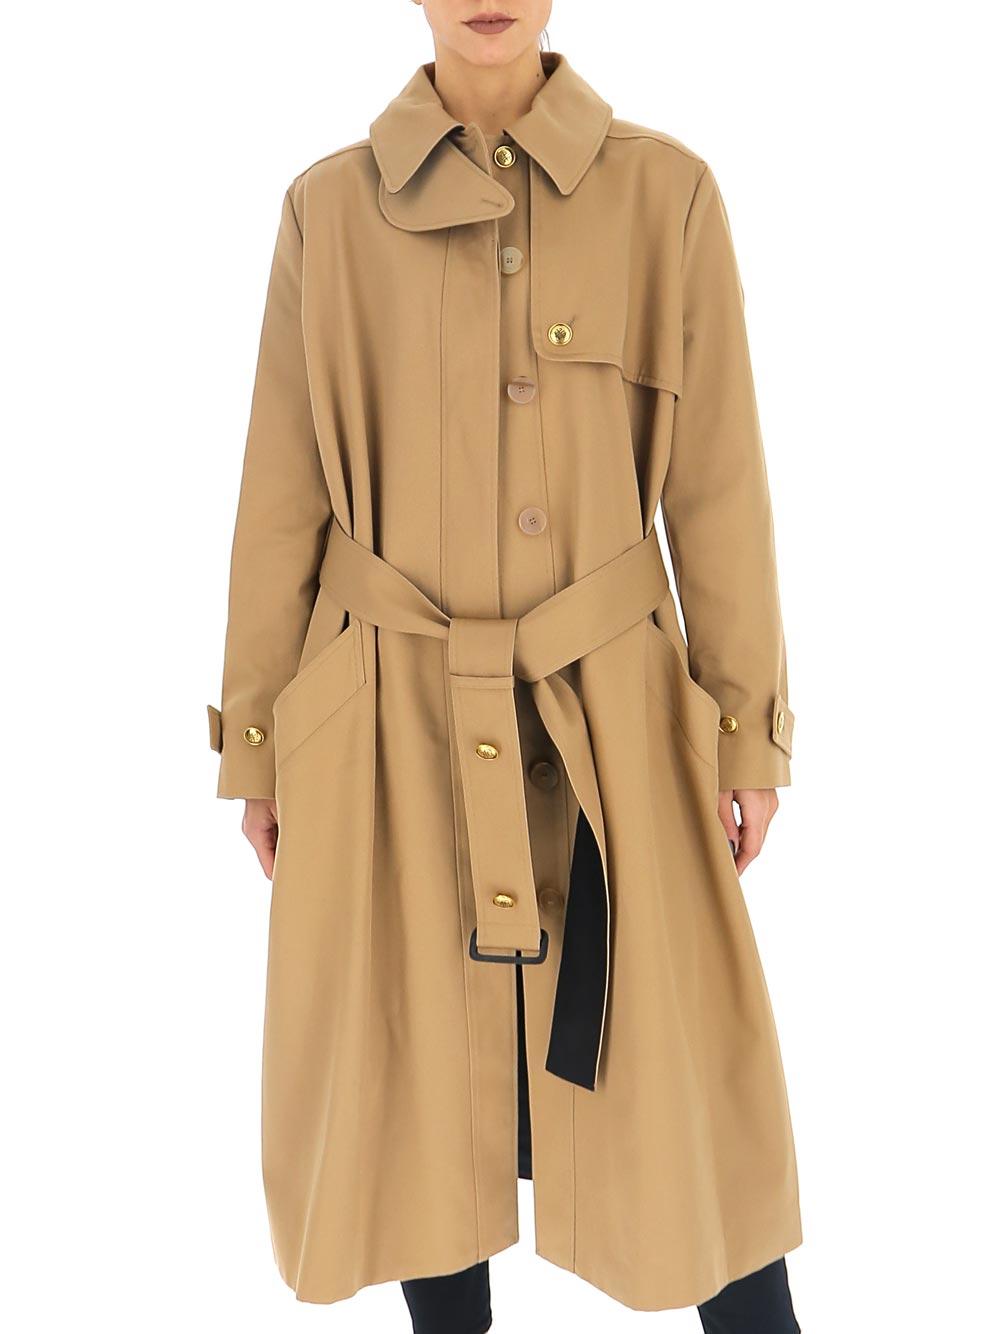 Givenchy Contrast Stripe Belted Trench Coat in Natural | Lyst